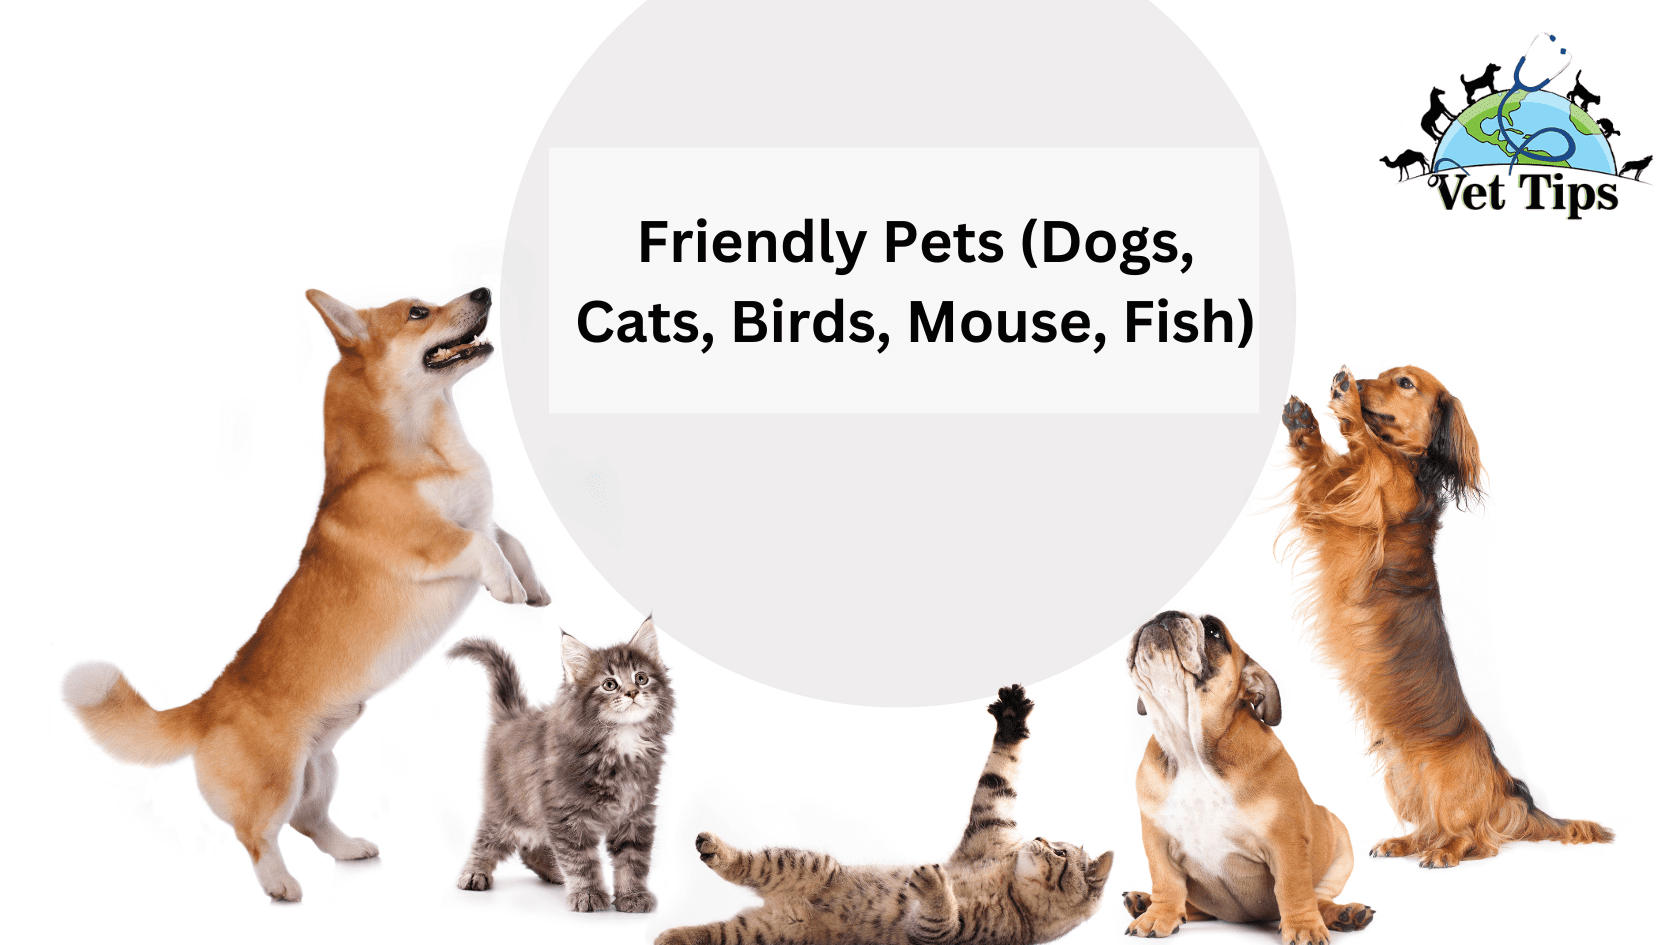 Friendly Pets (Dogs, Cats, Birds, Mouse, Fish)